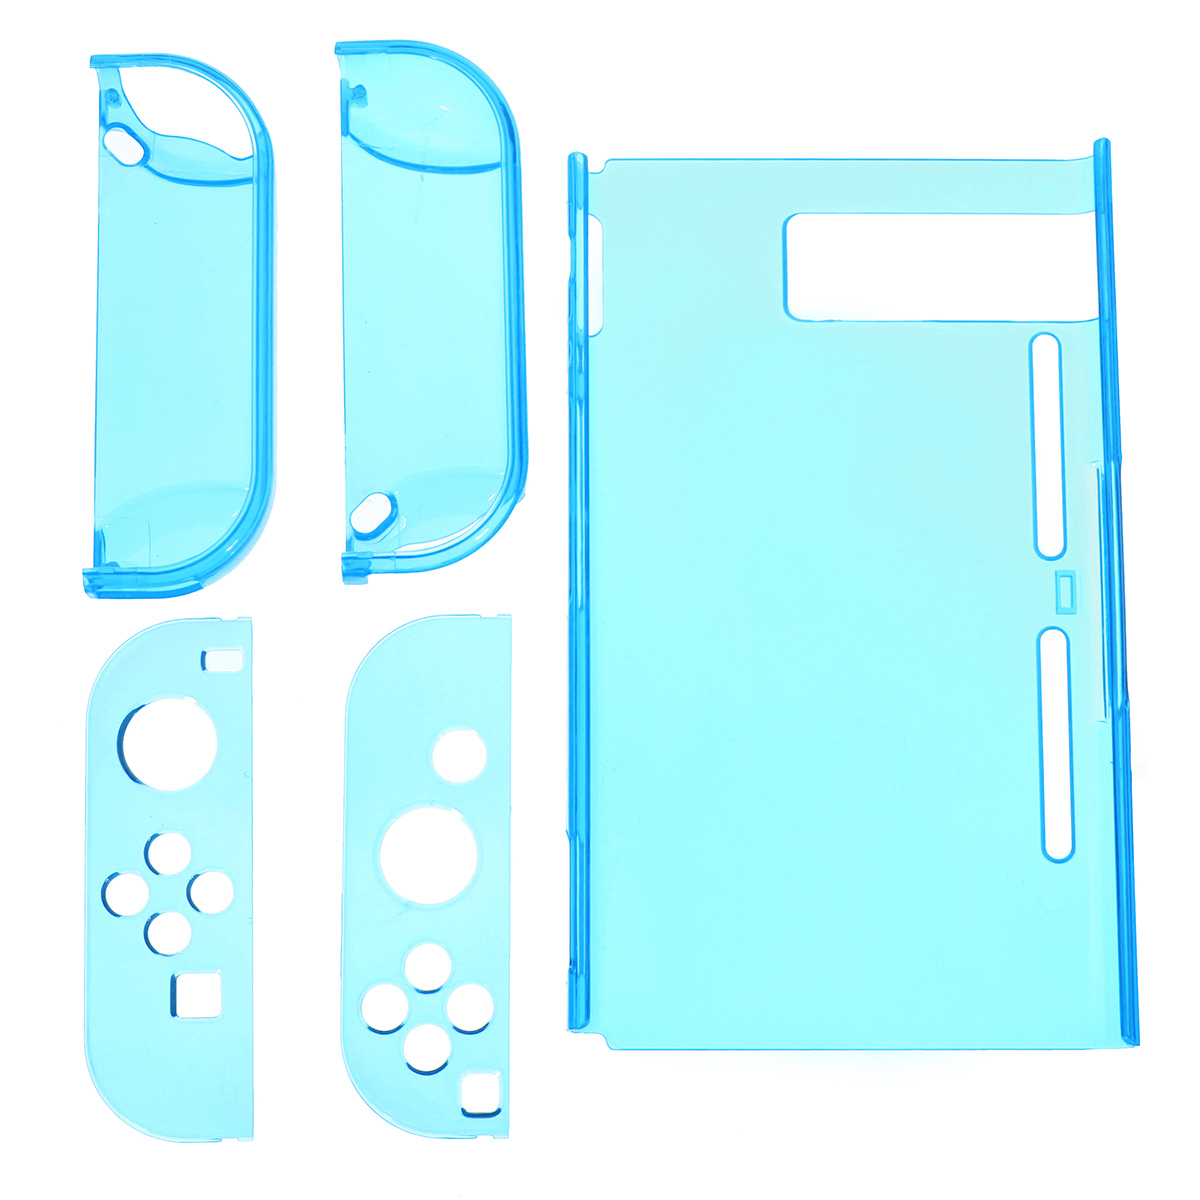 Detachable-Protective-Hard-Case-Cover-Shell-Skin-For-Nintendo-Switch-Joy-Con-Gamepad-Game-Console-1431741-4